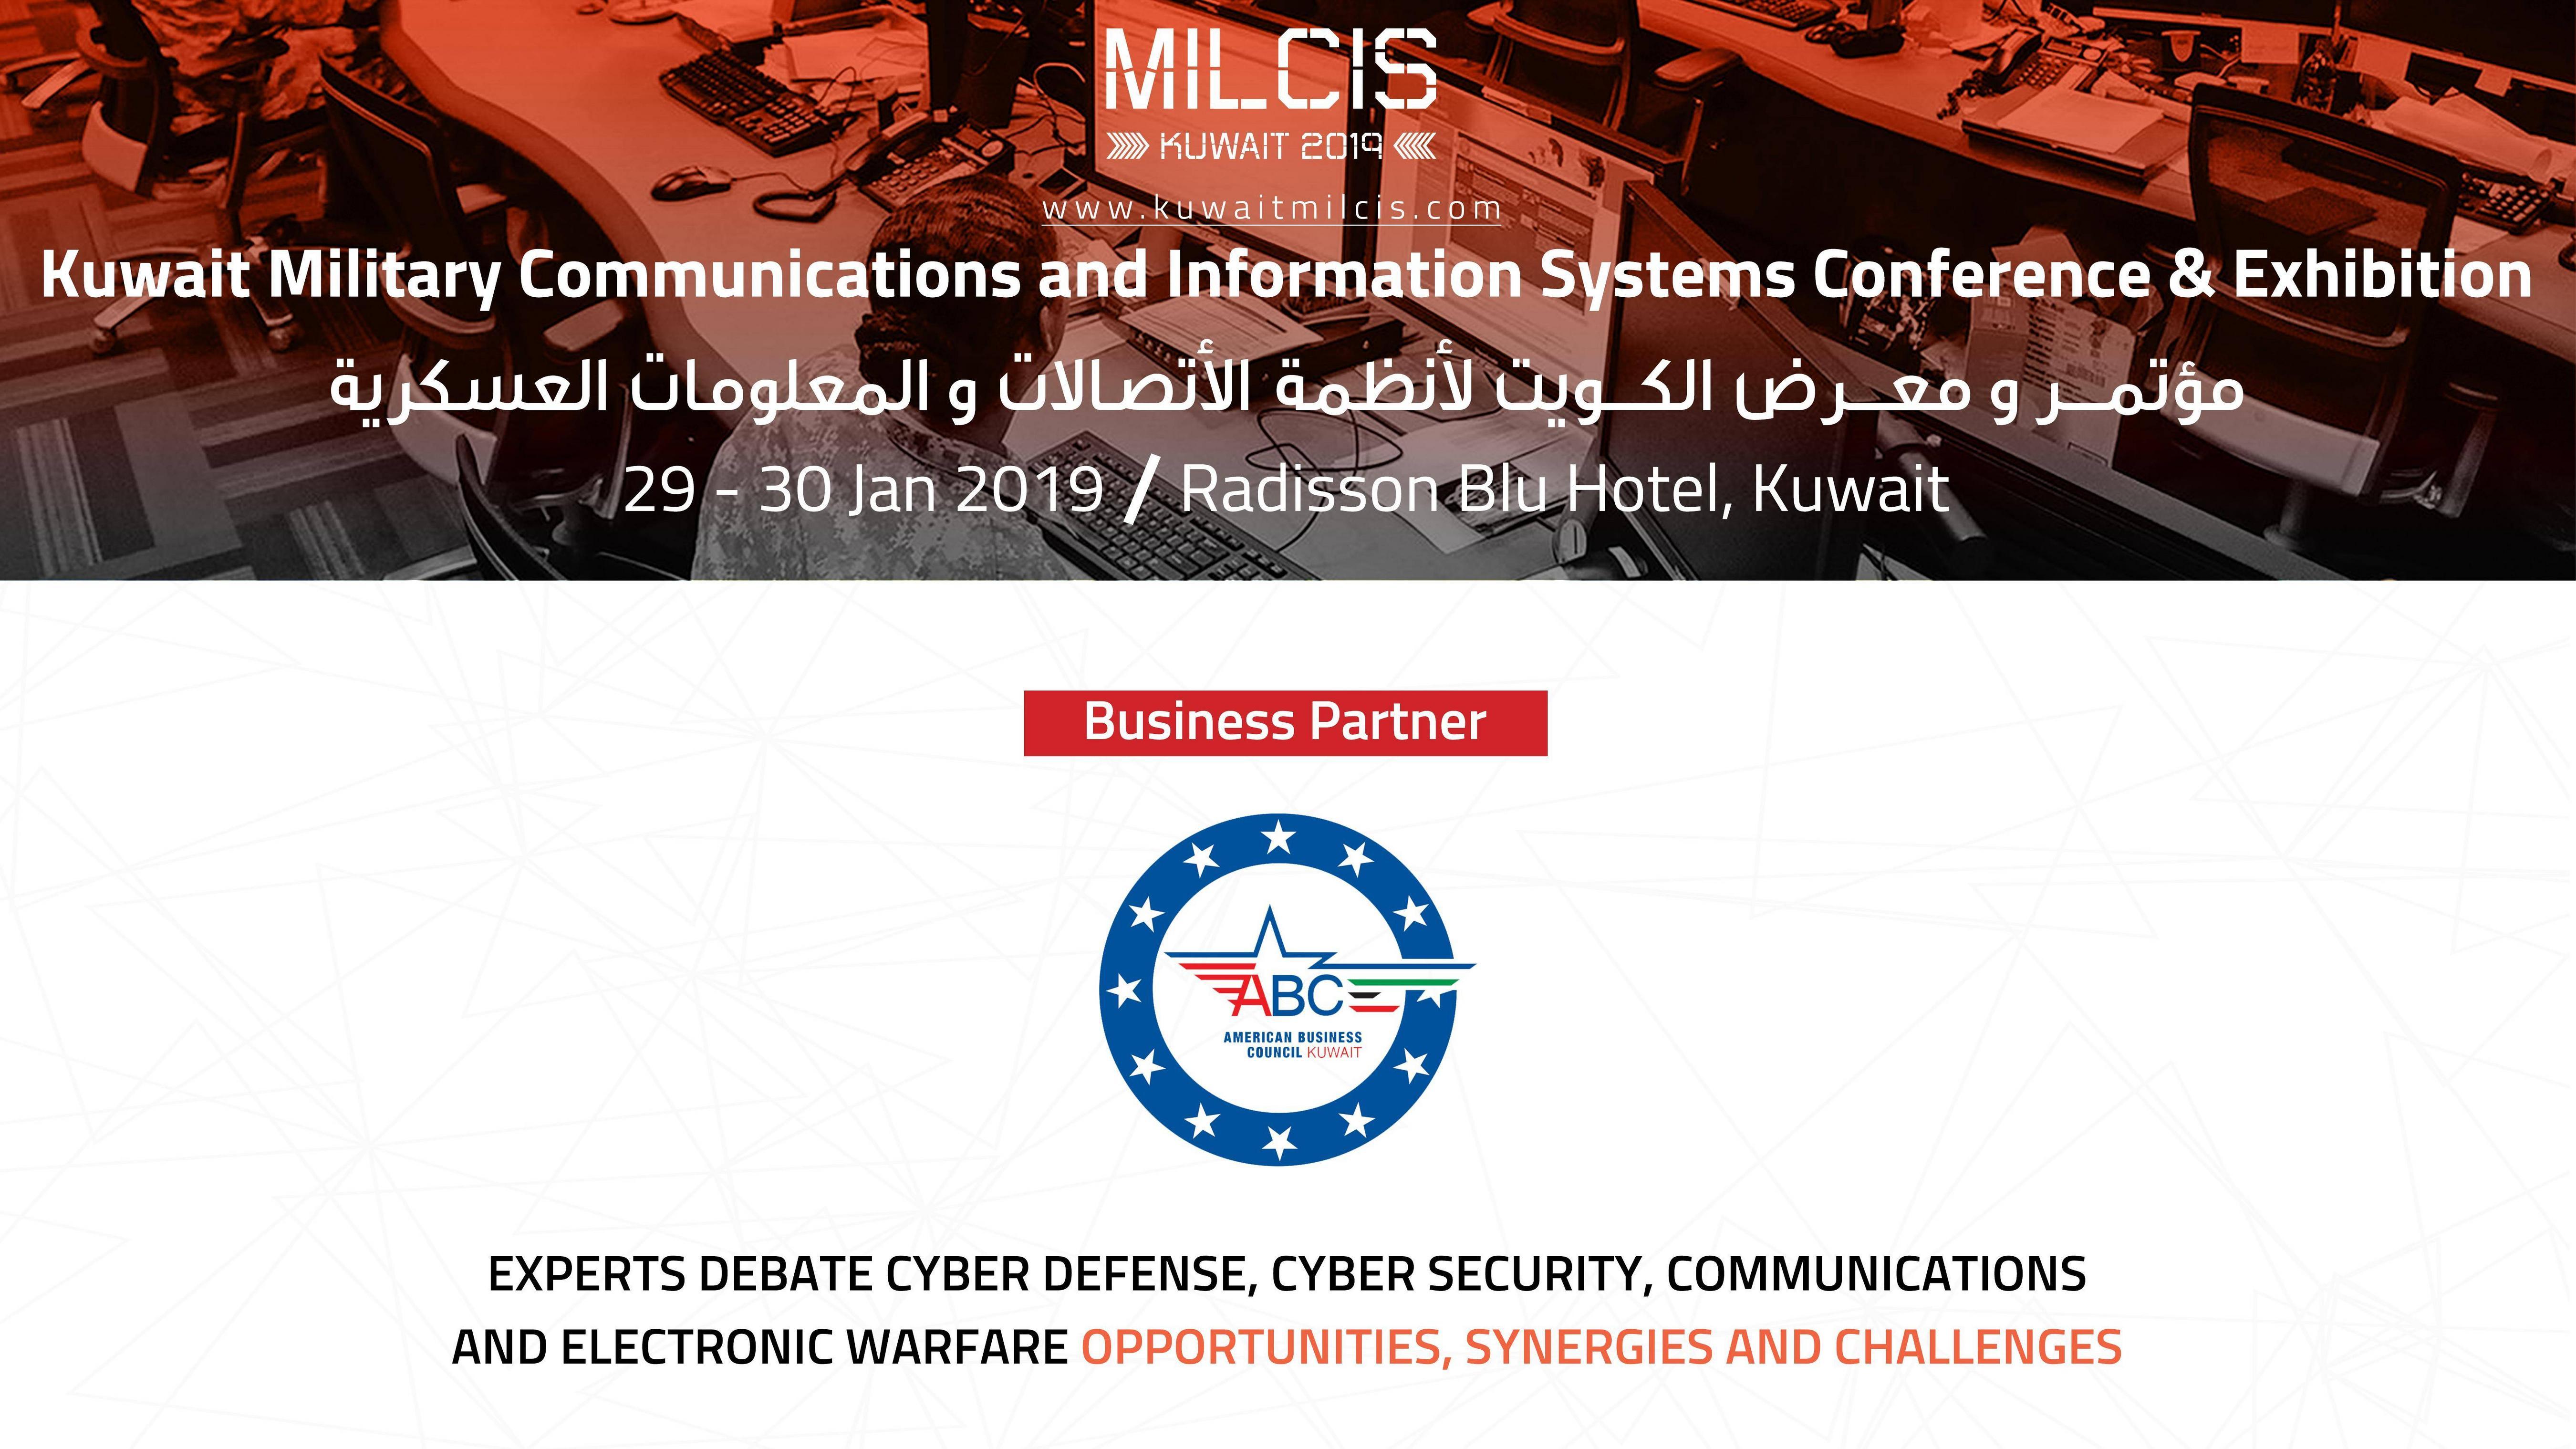 Military Communications Logo - Kuwait Military Communications and Information Systems Conference